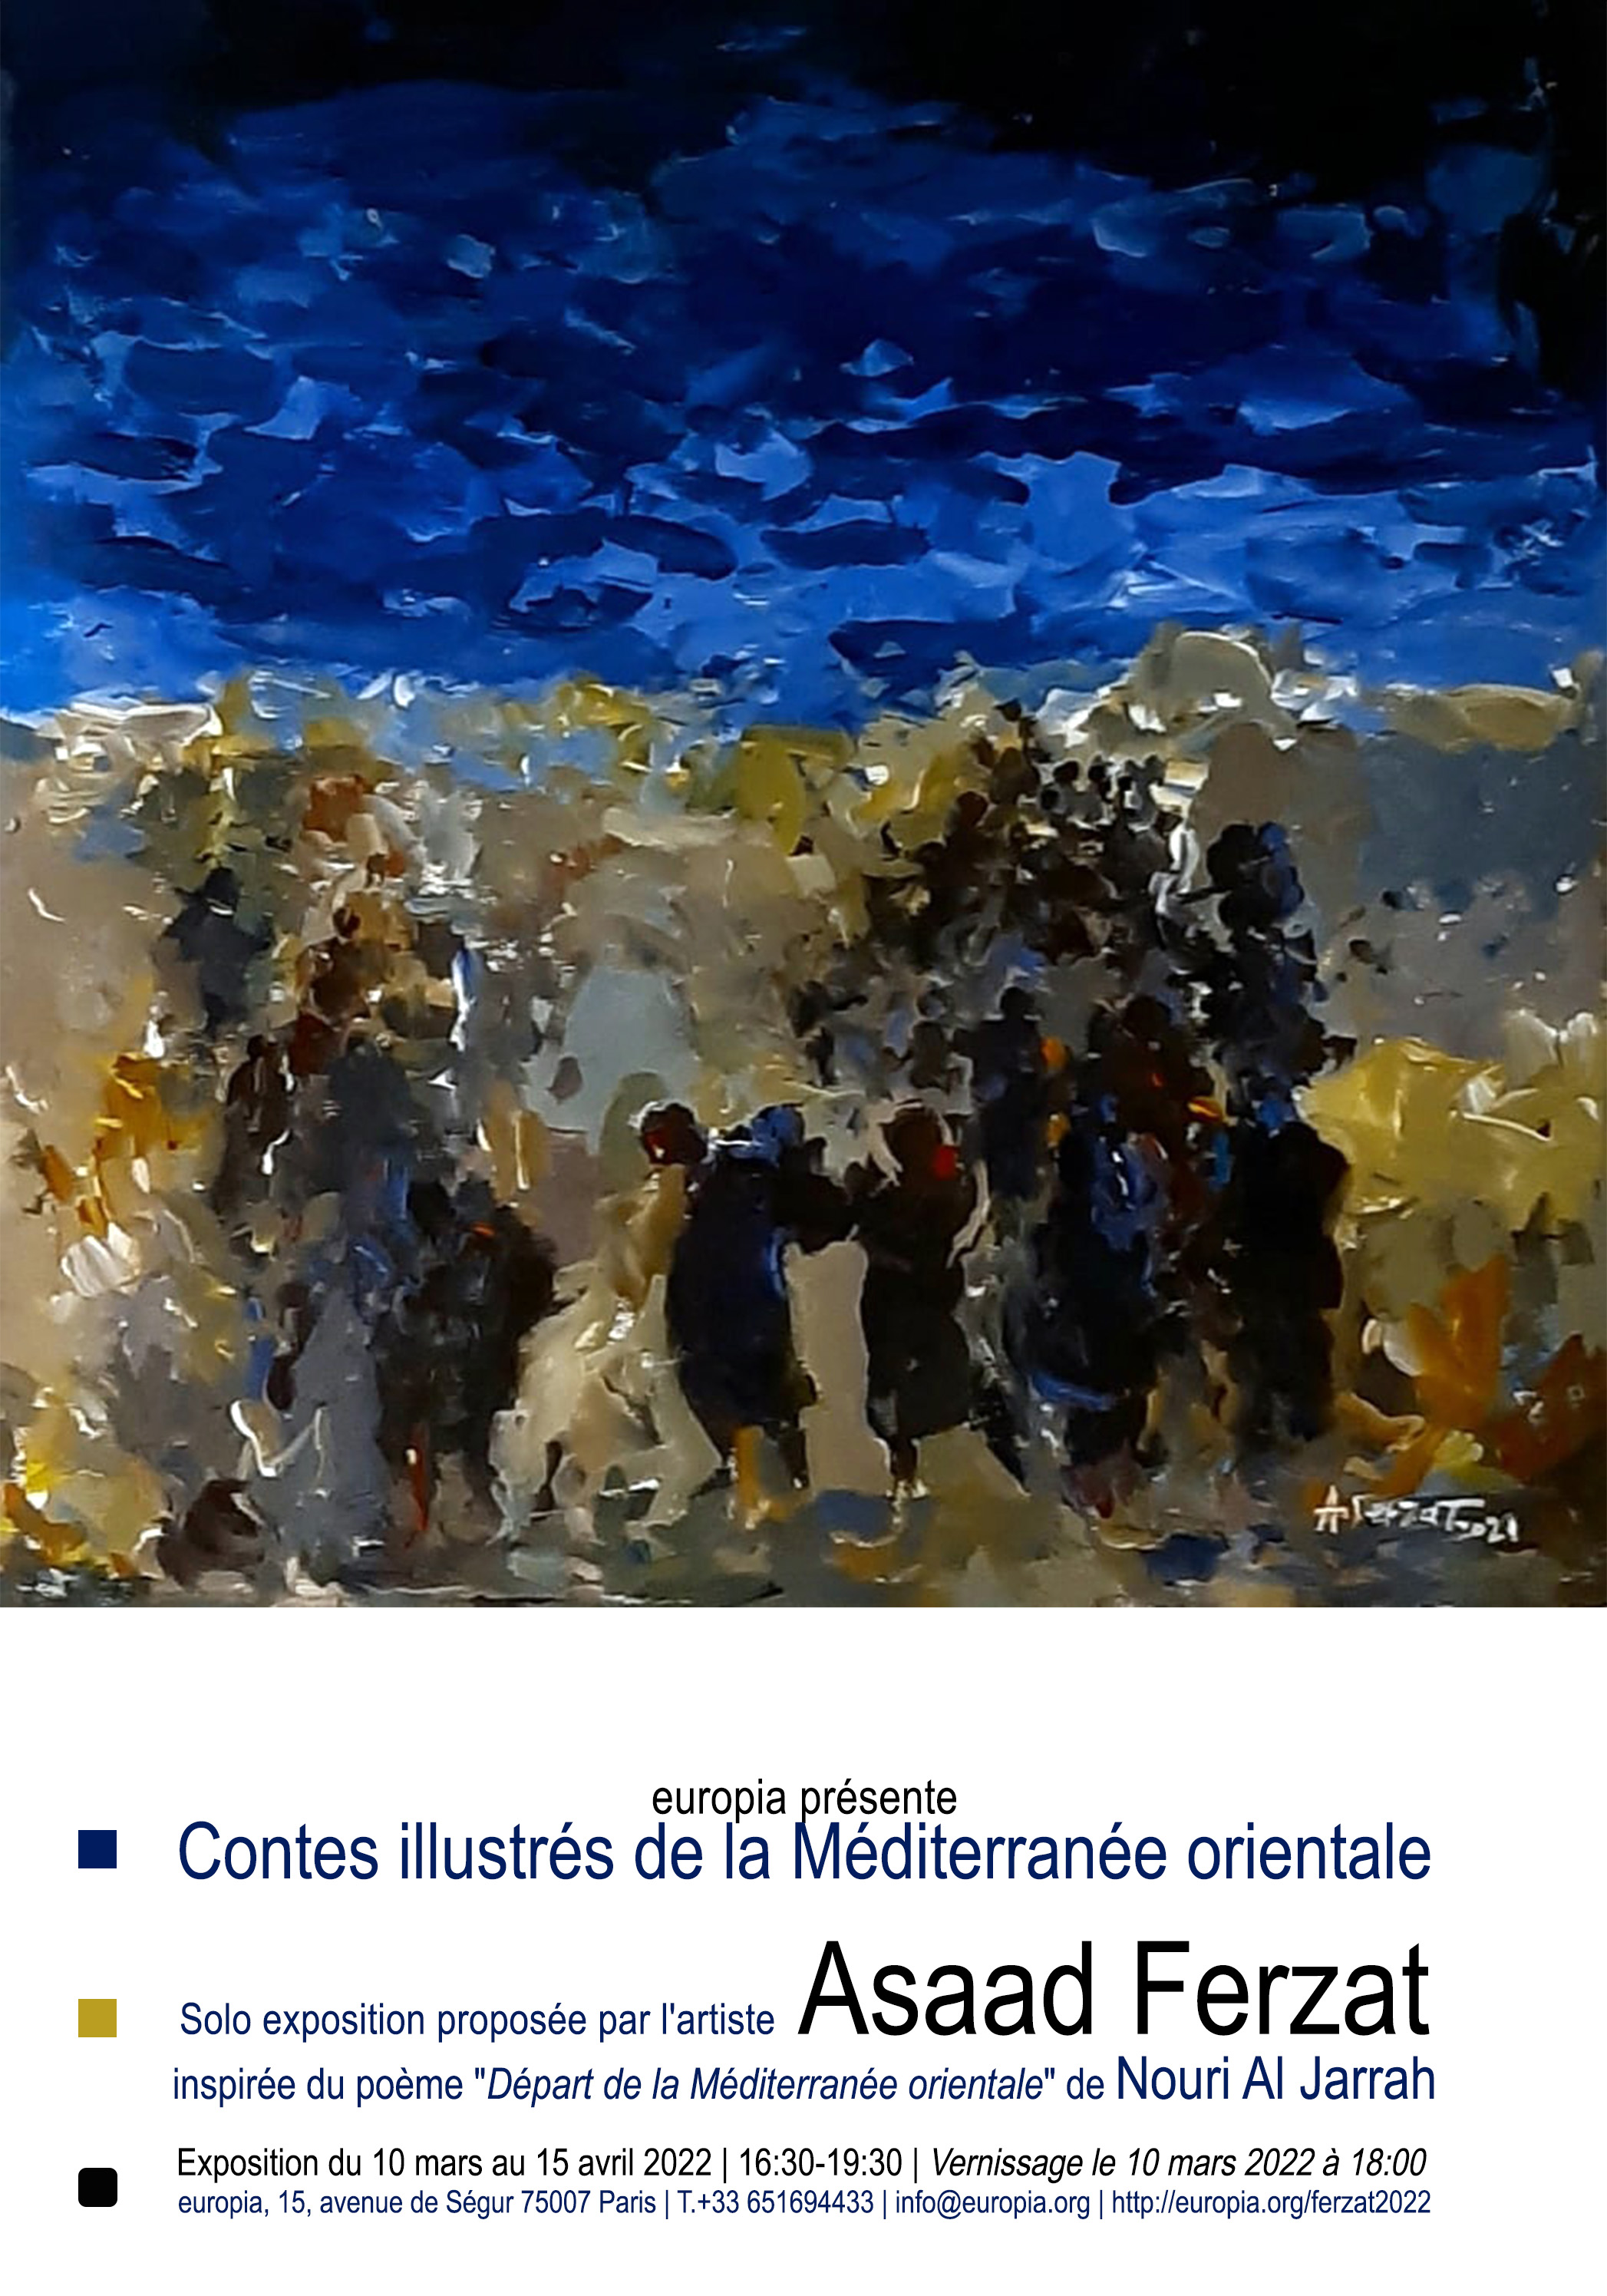 llustrated Tales of the Eastern Mediterranean
Solo Exhibition by Asaad FERZAT @ Europia